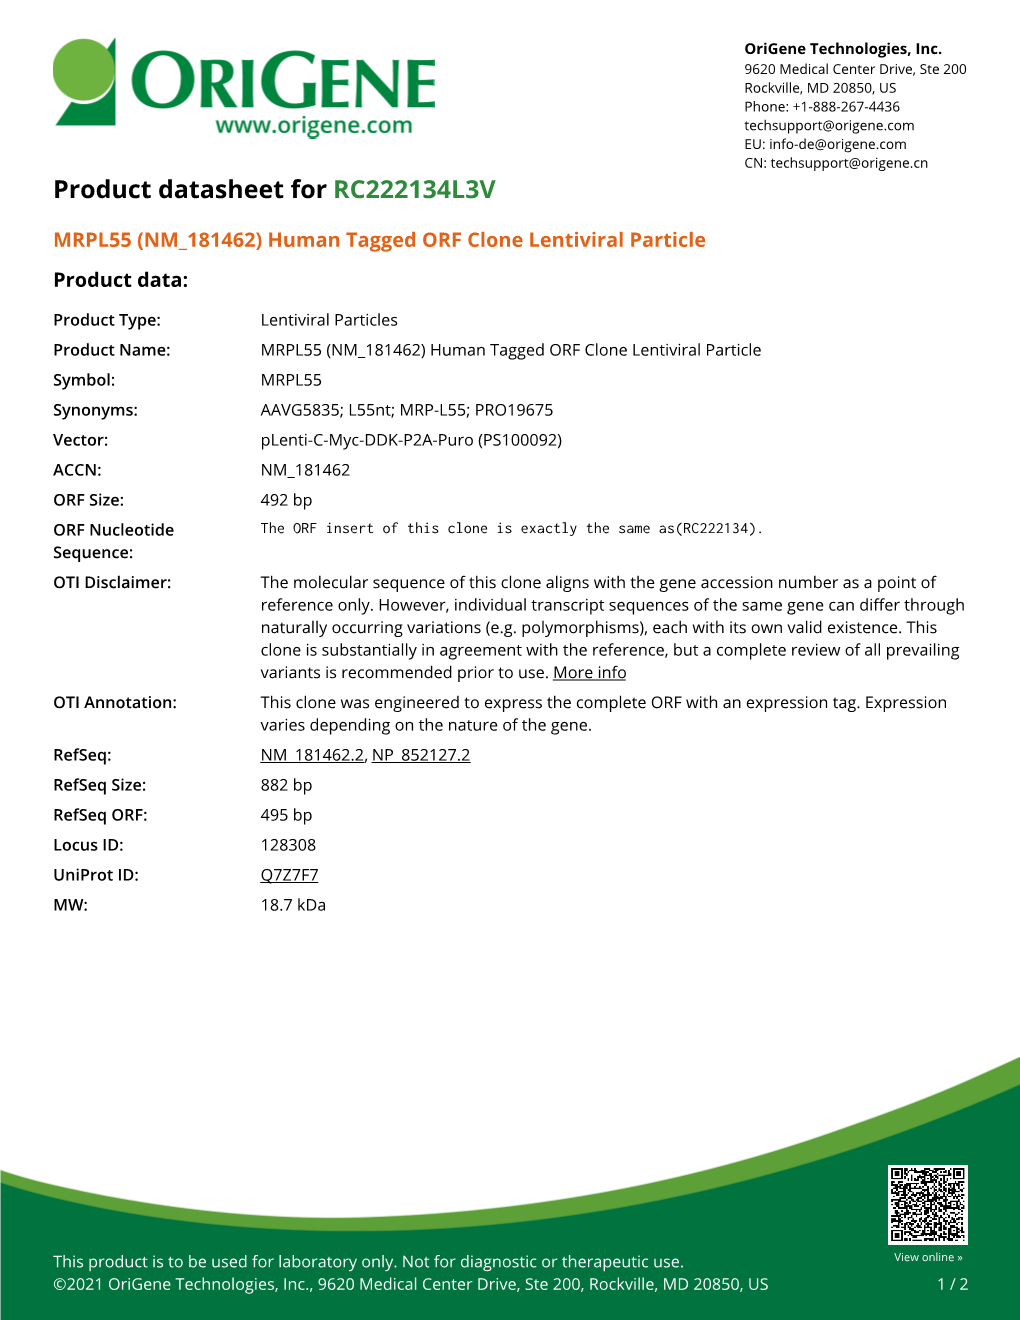 MRPL55 (NM 181462) Human Tagged ORF Clone Lentiviral Particle Product Data